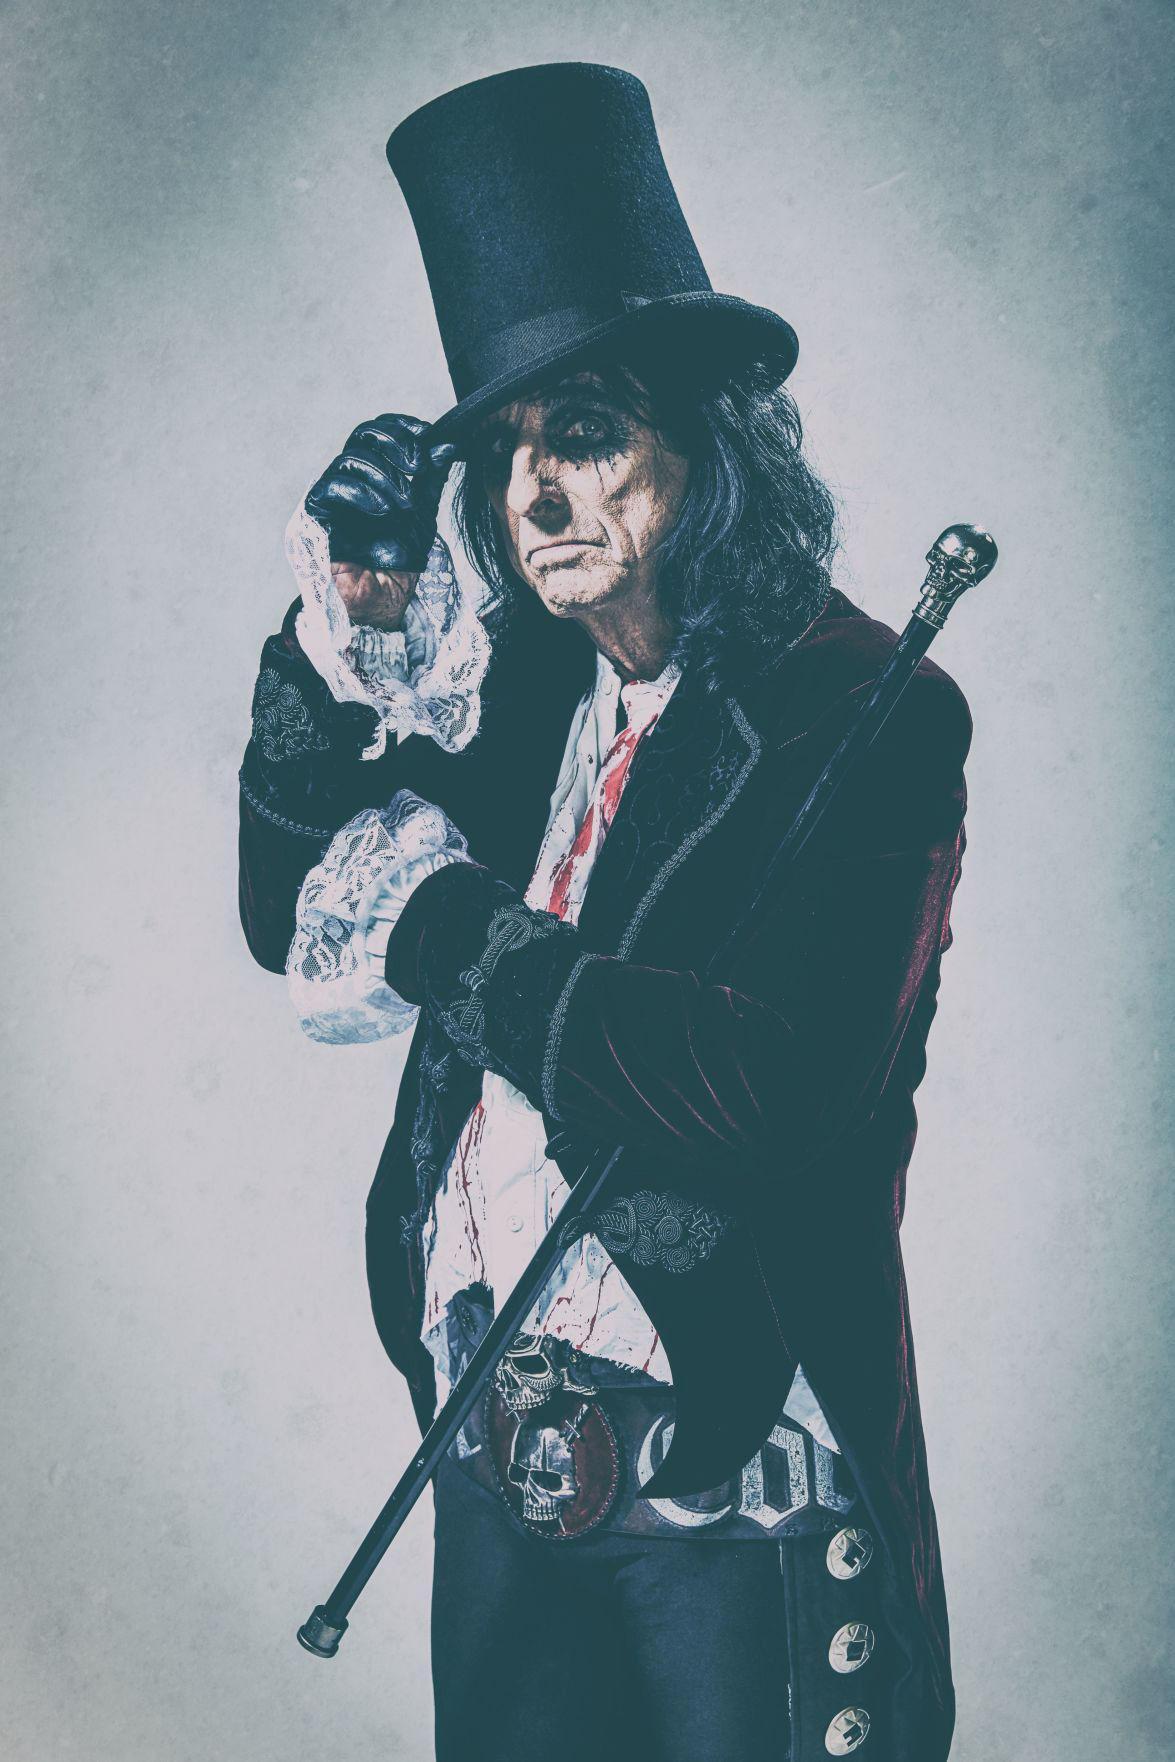 Alice Cooper, famous for shows with guillotines and snakes, coming to ...